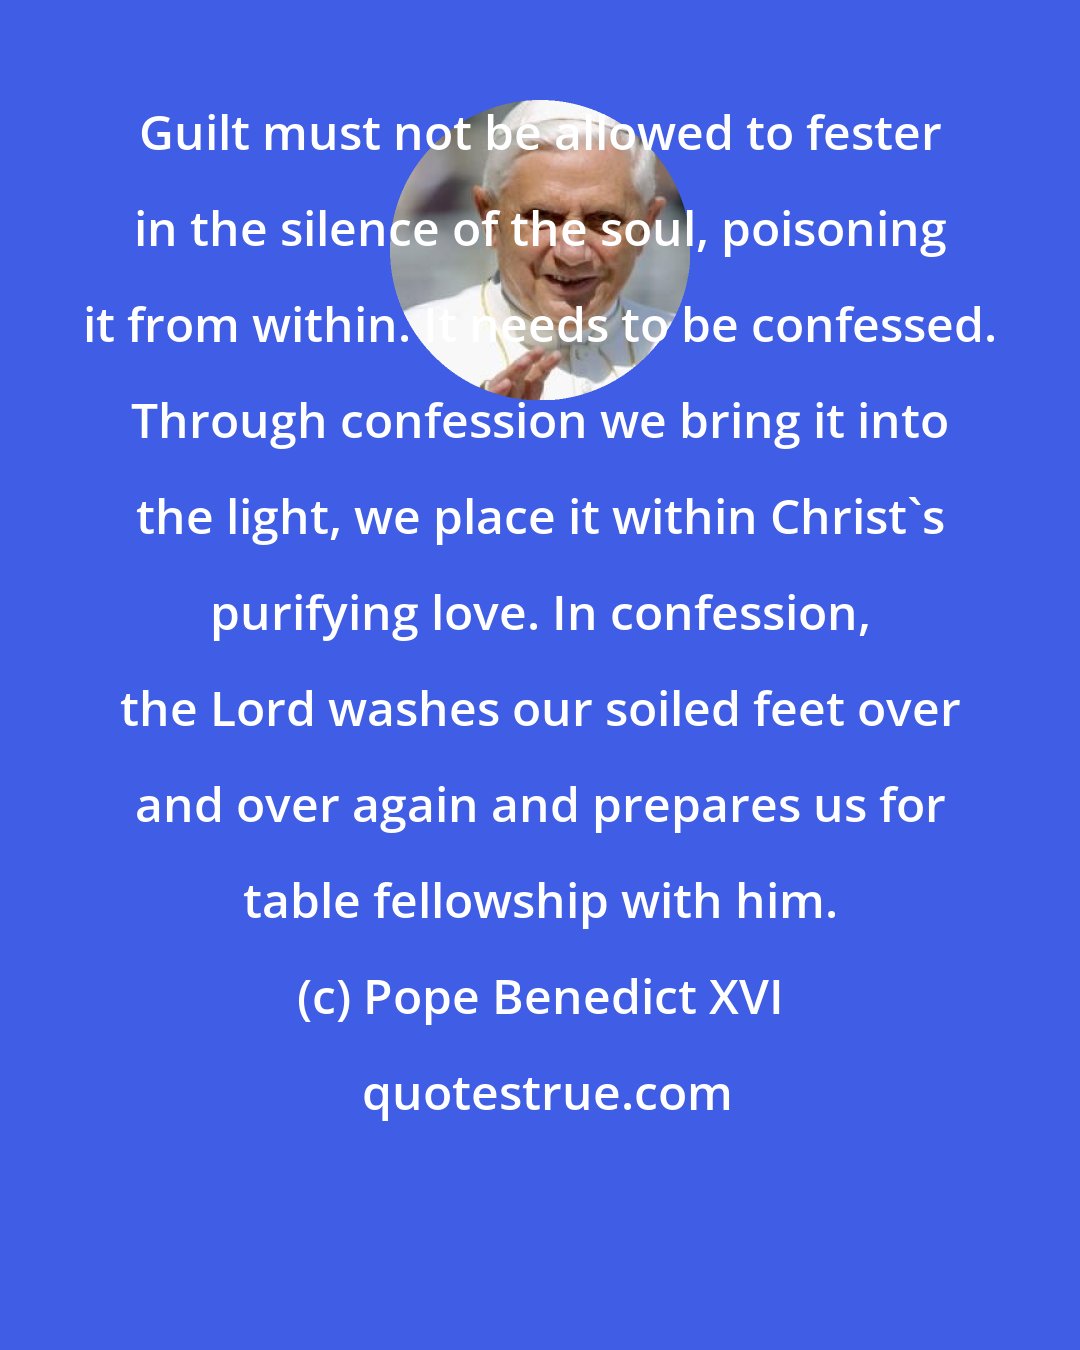 Pope Benedict XVI: Guilt must not be allowed to fester in the silence of the soul, poisoning it from within. It needs to be confessed. Through confession we bring it into the light, we place it within Christ's purifying love. In confession, the Lord washes our soiled feet over and over again and prepares us for table fellowship with him.